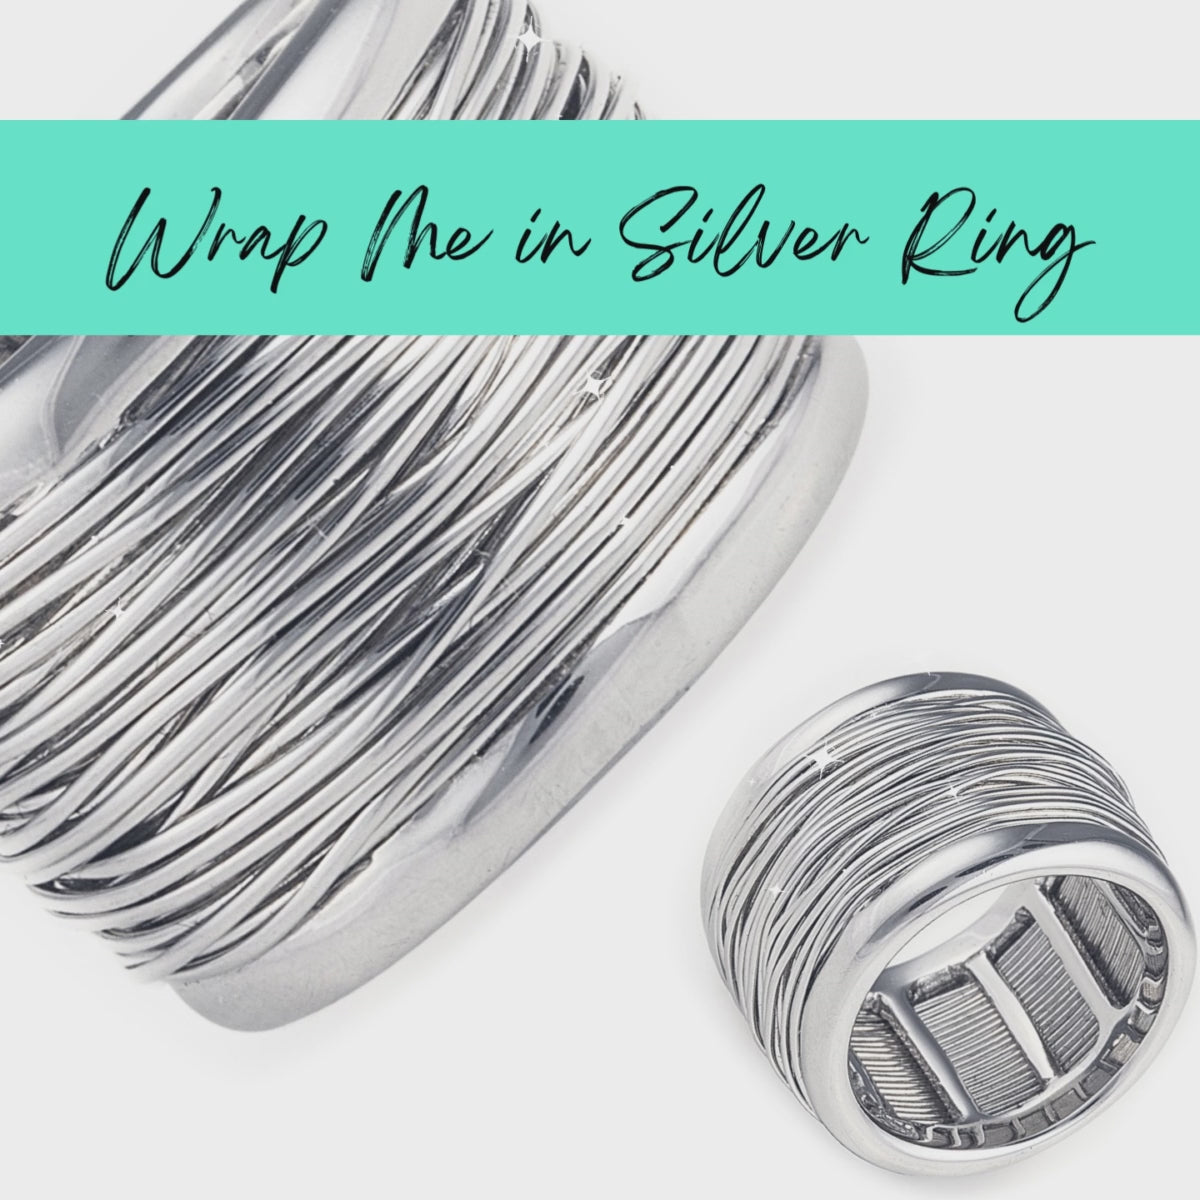 Wrap Me in Silver Ring is made of 925 sterling silver, and features strands of wrapped silver wire for a unique and edgy look. Shop rings & affordable luxury jewellery by Bellagio & Co. Worldwide shipping